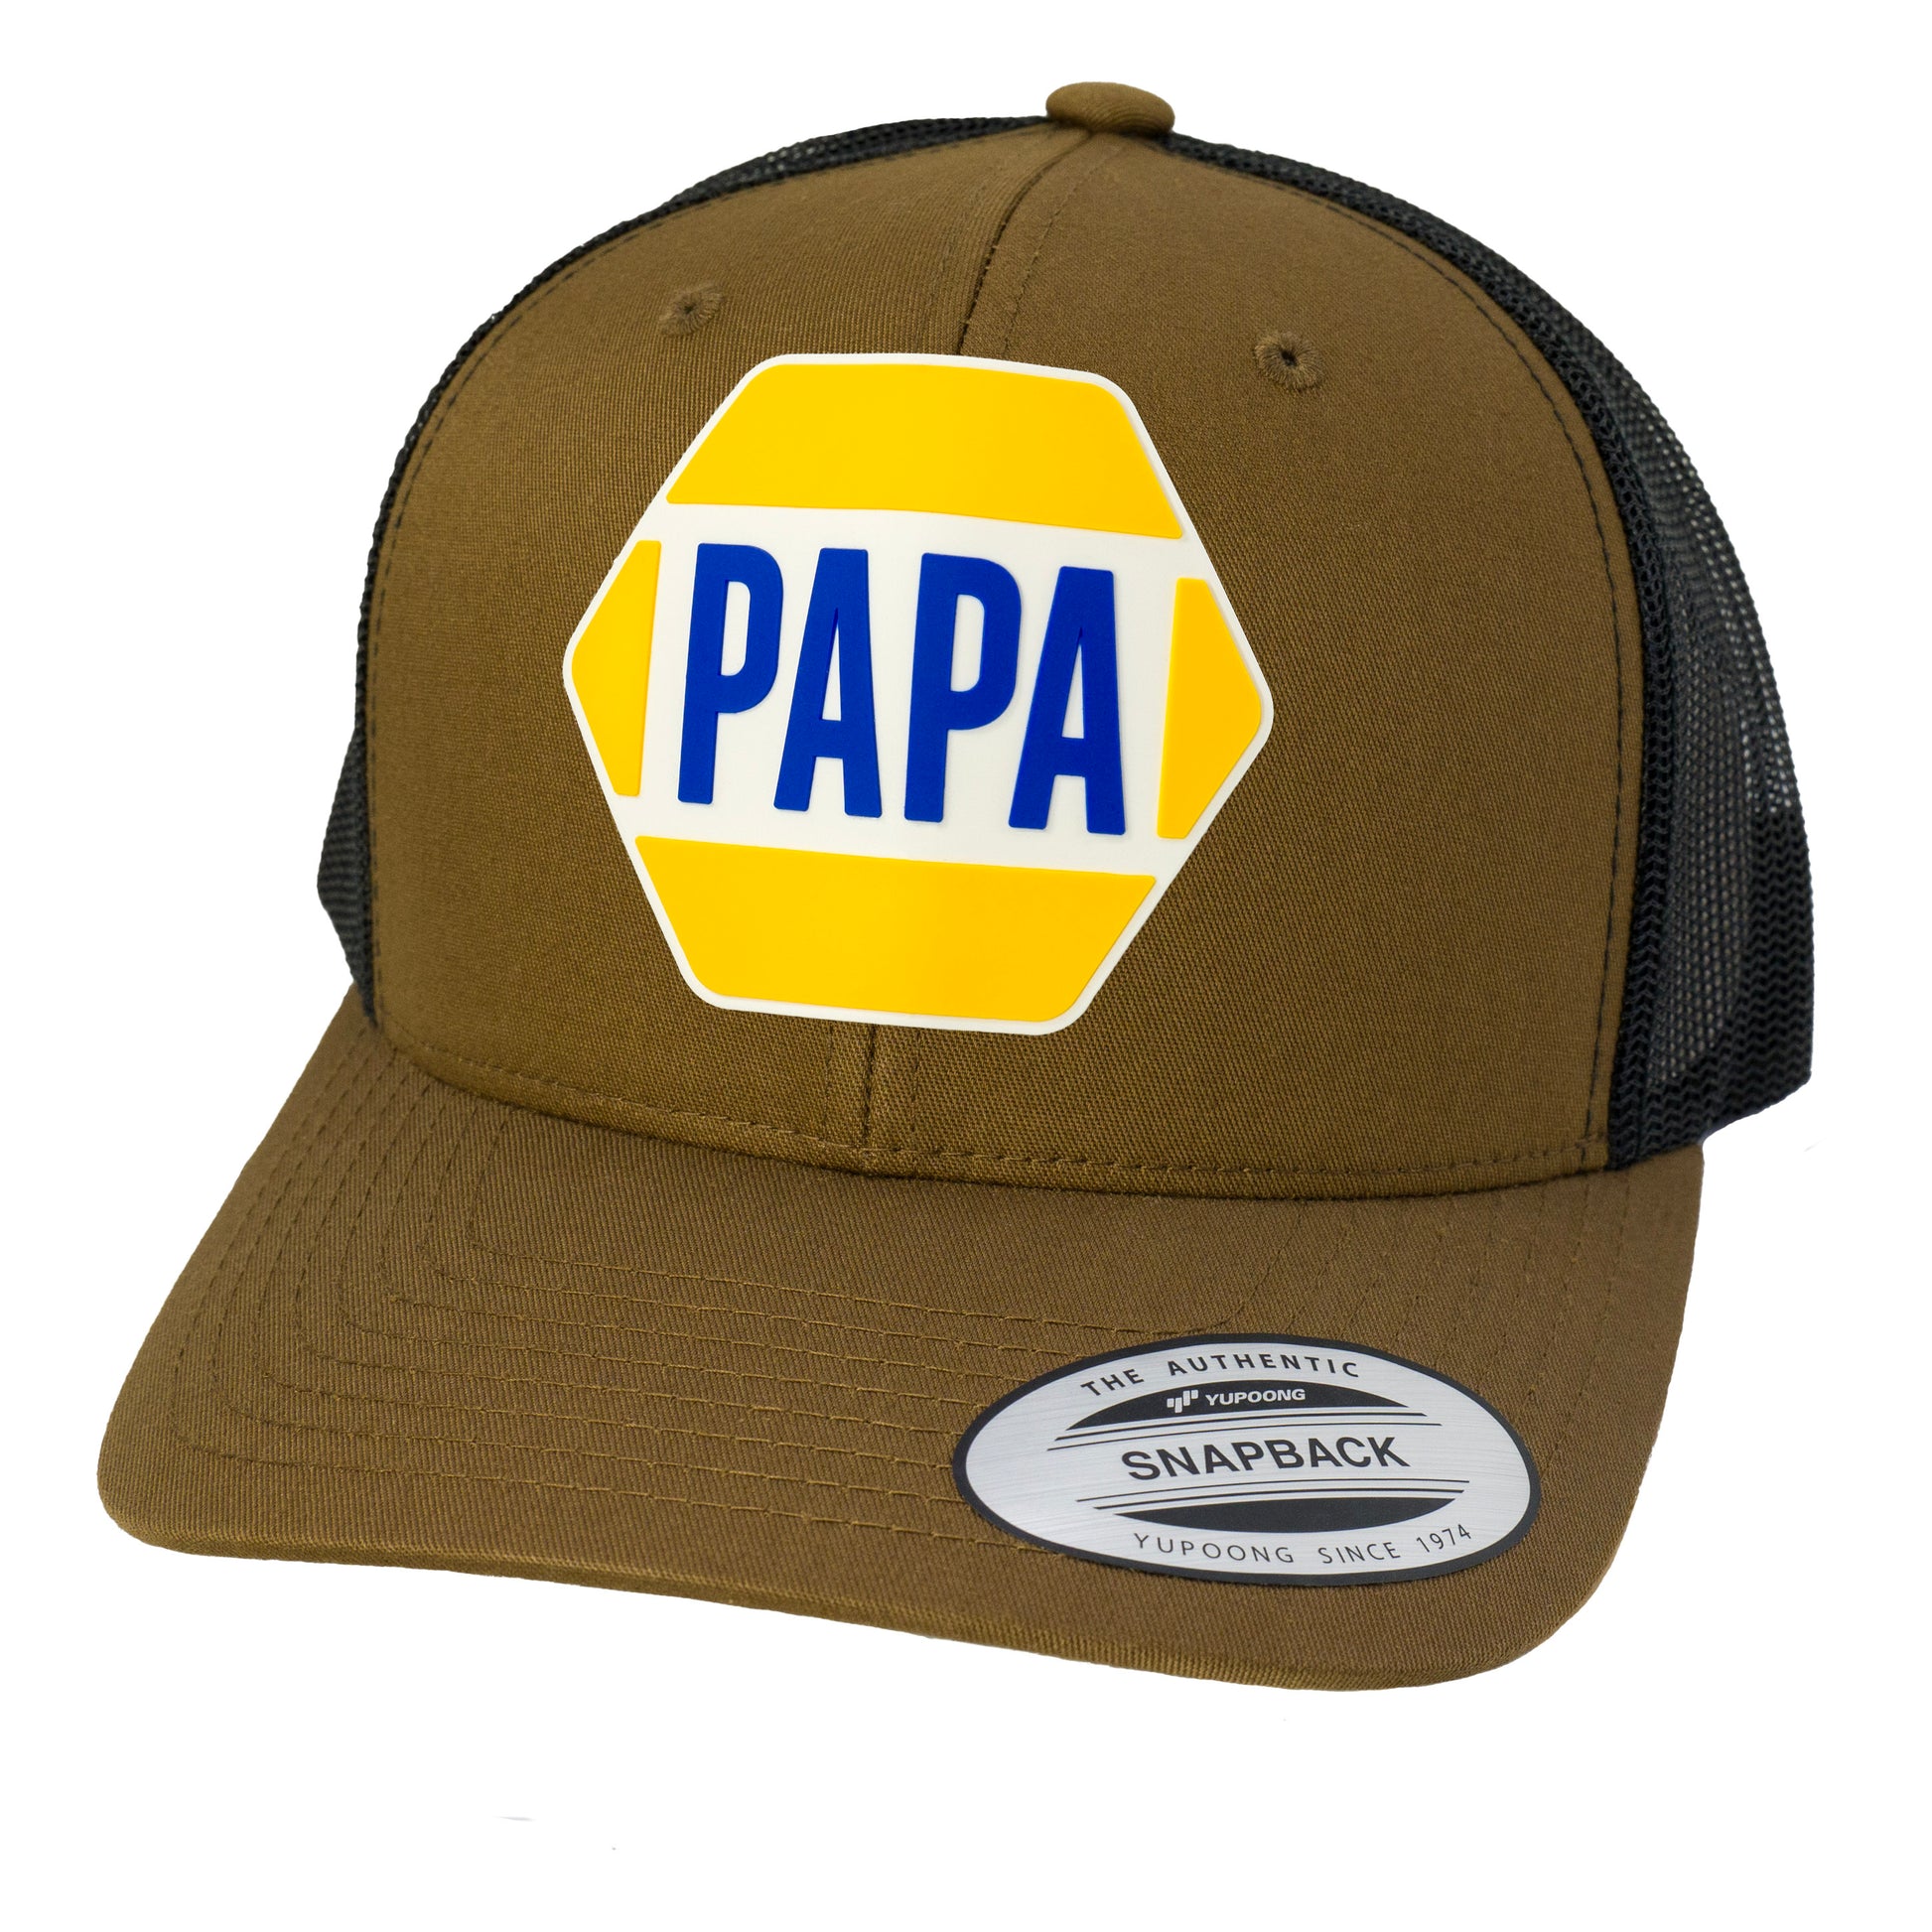 PAPA Know How 3D YP Snapback Trucker Hat- Coyote Brown/ Black - Ten Gallon Hat Co.